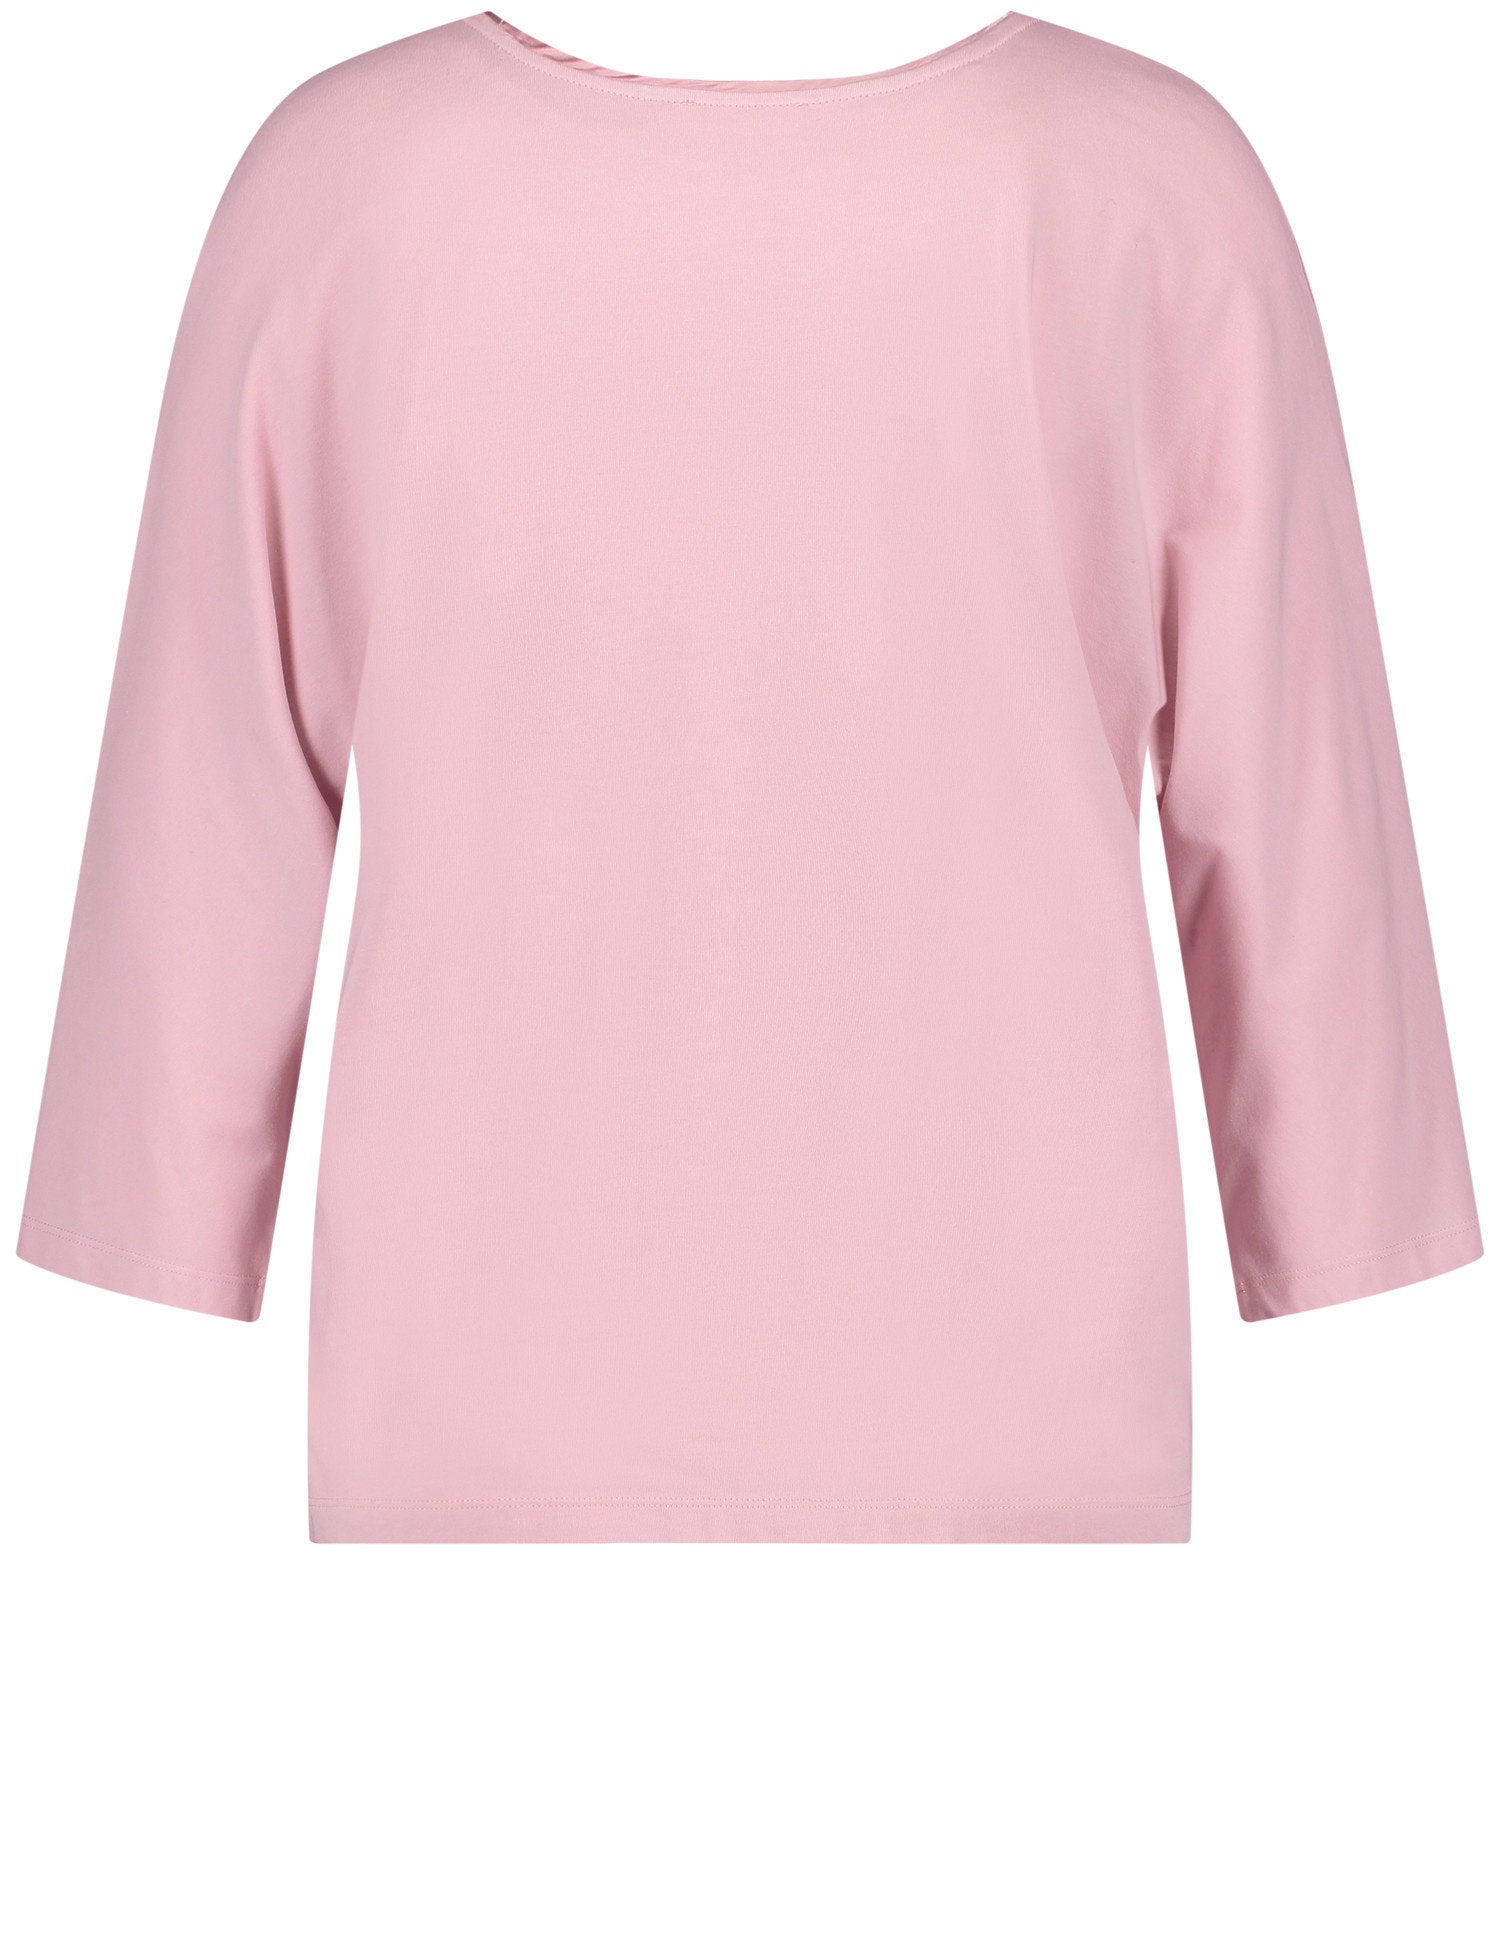 3/4 Sleeve Top With A Fabric Panel And A Subtle Sheen_270229-35033_30907_03